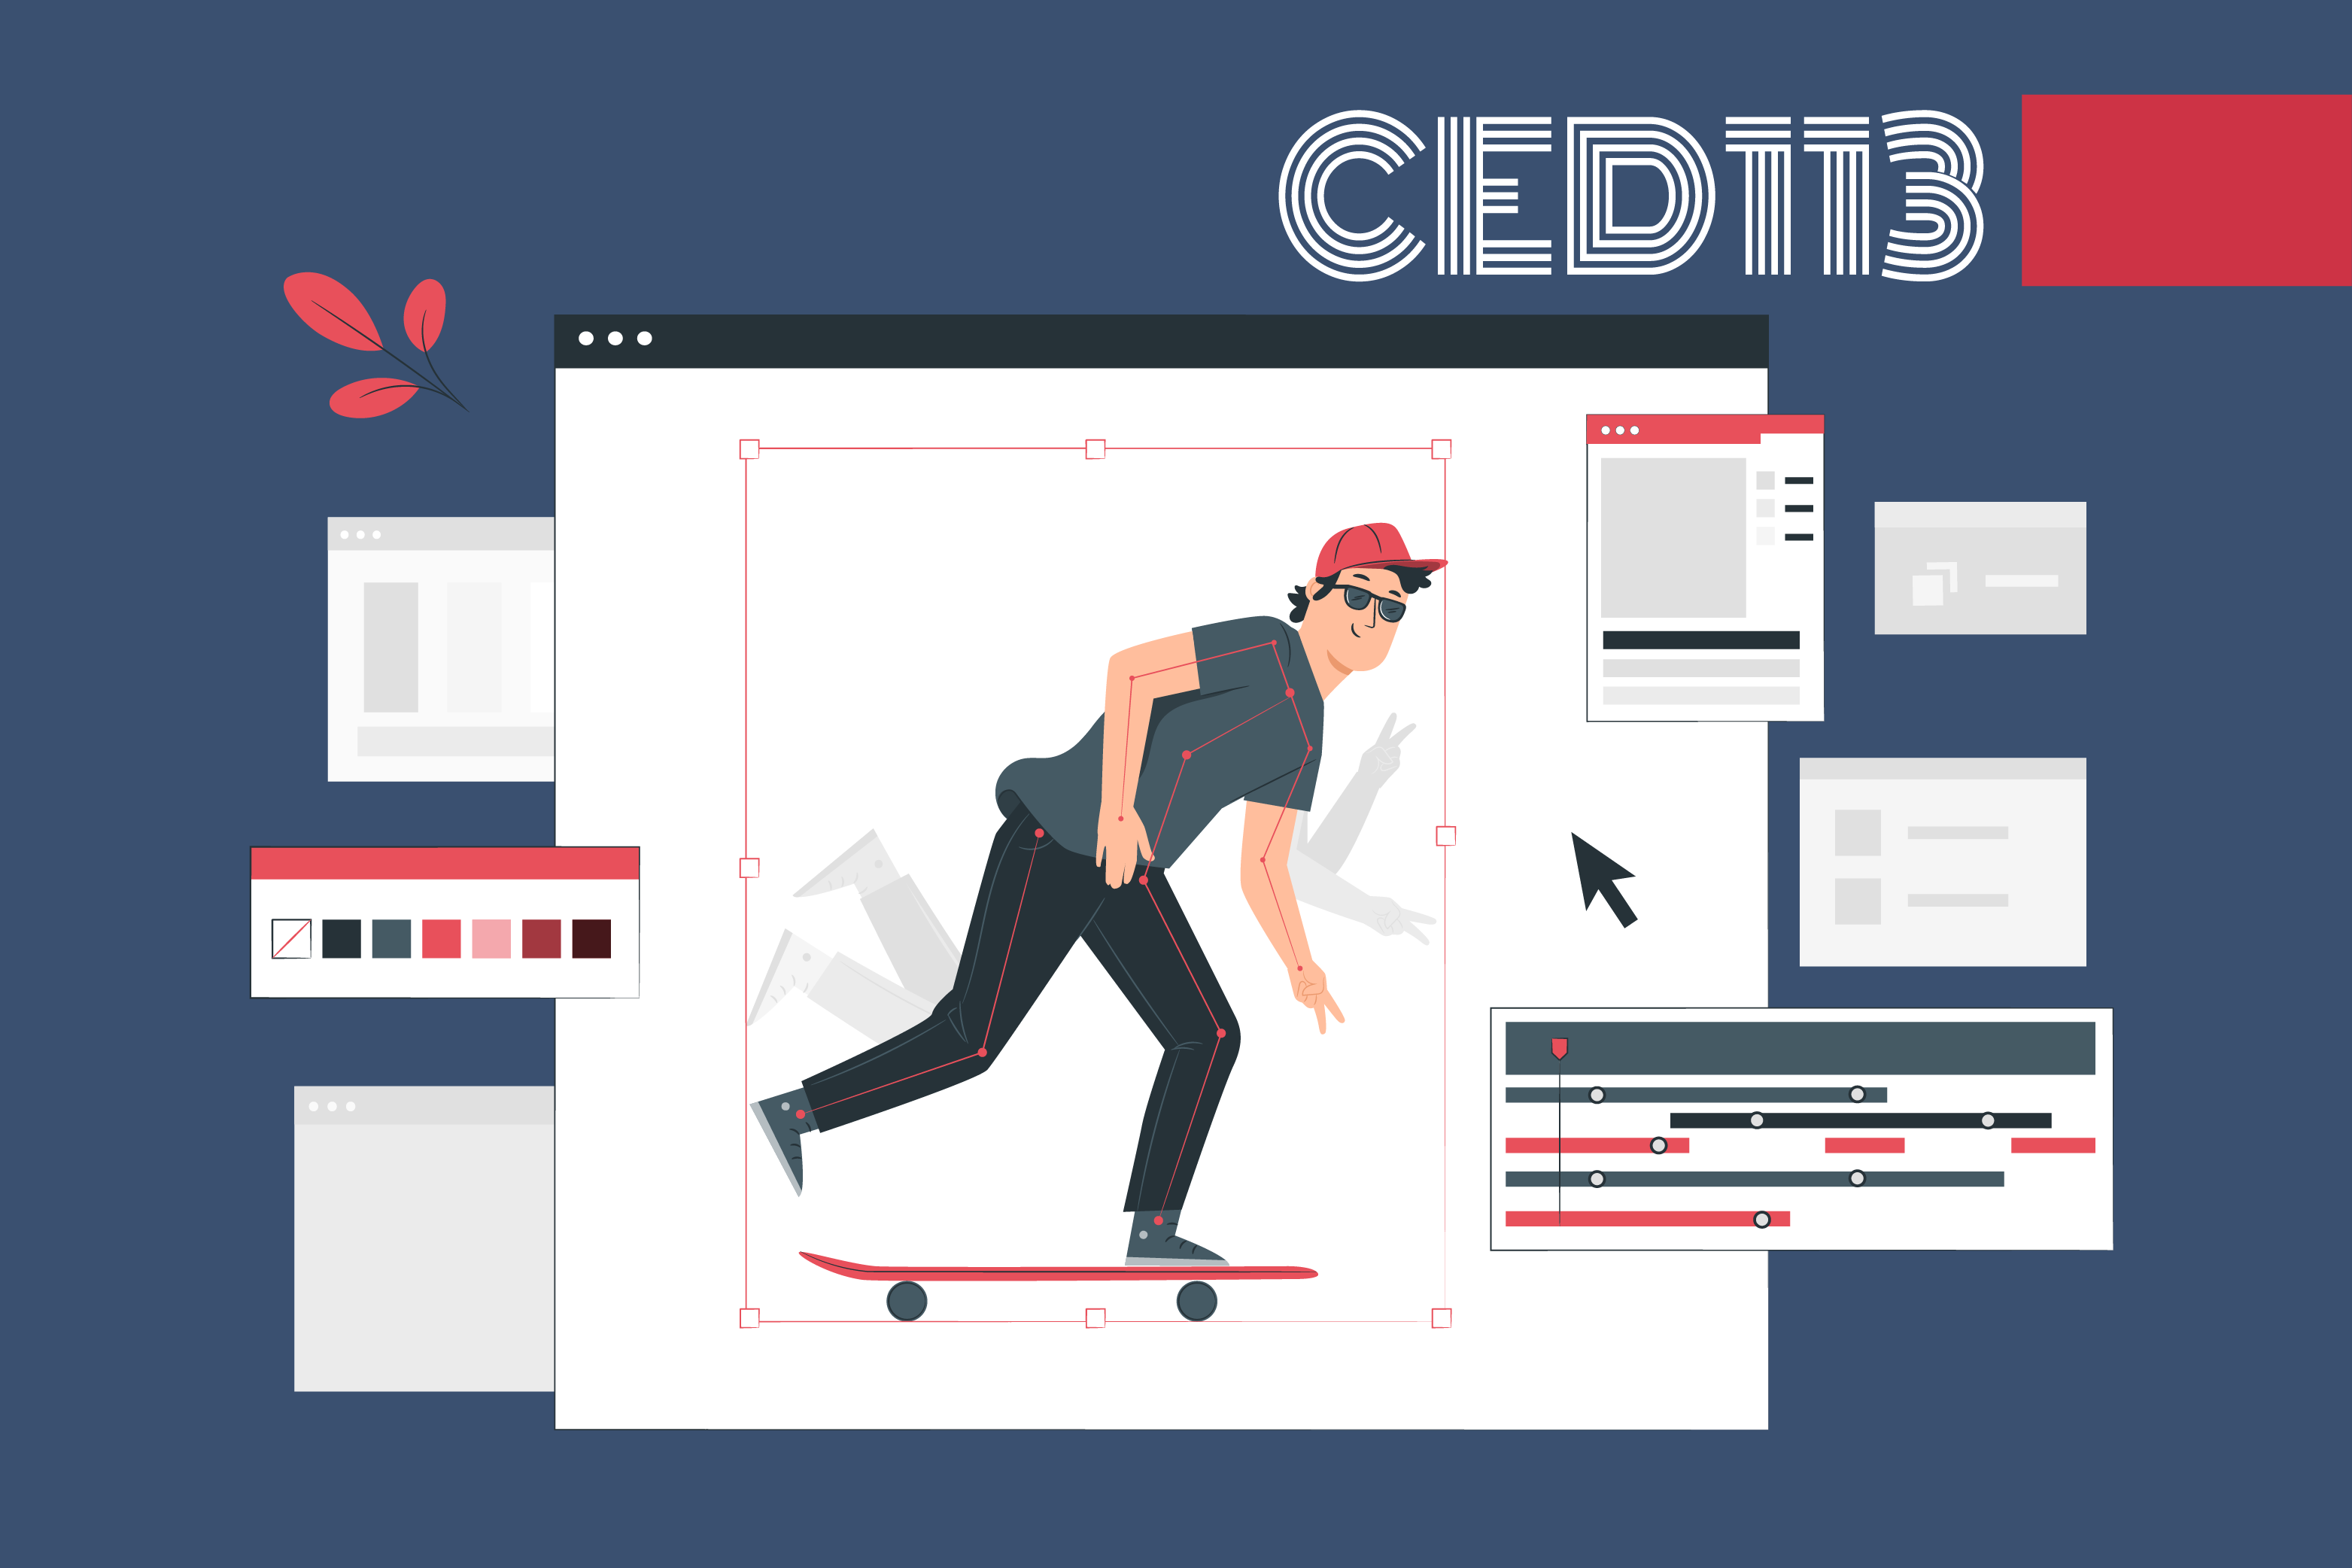 CED113 MULTIMEDIA AND ANIMATION FOR EDUCATION 